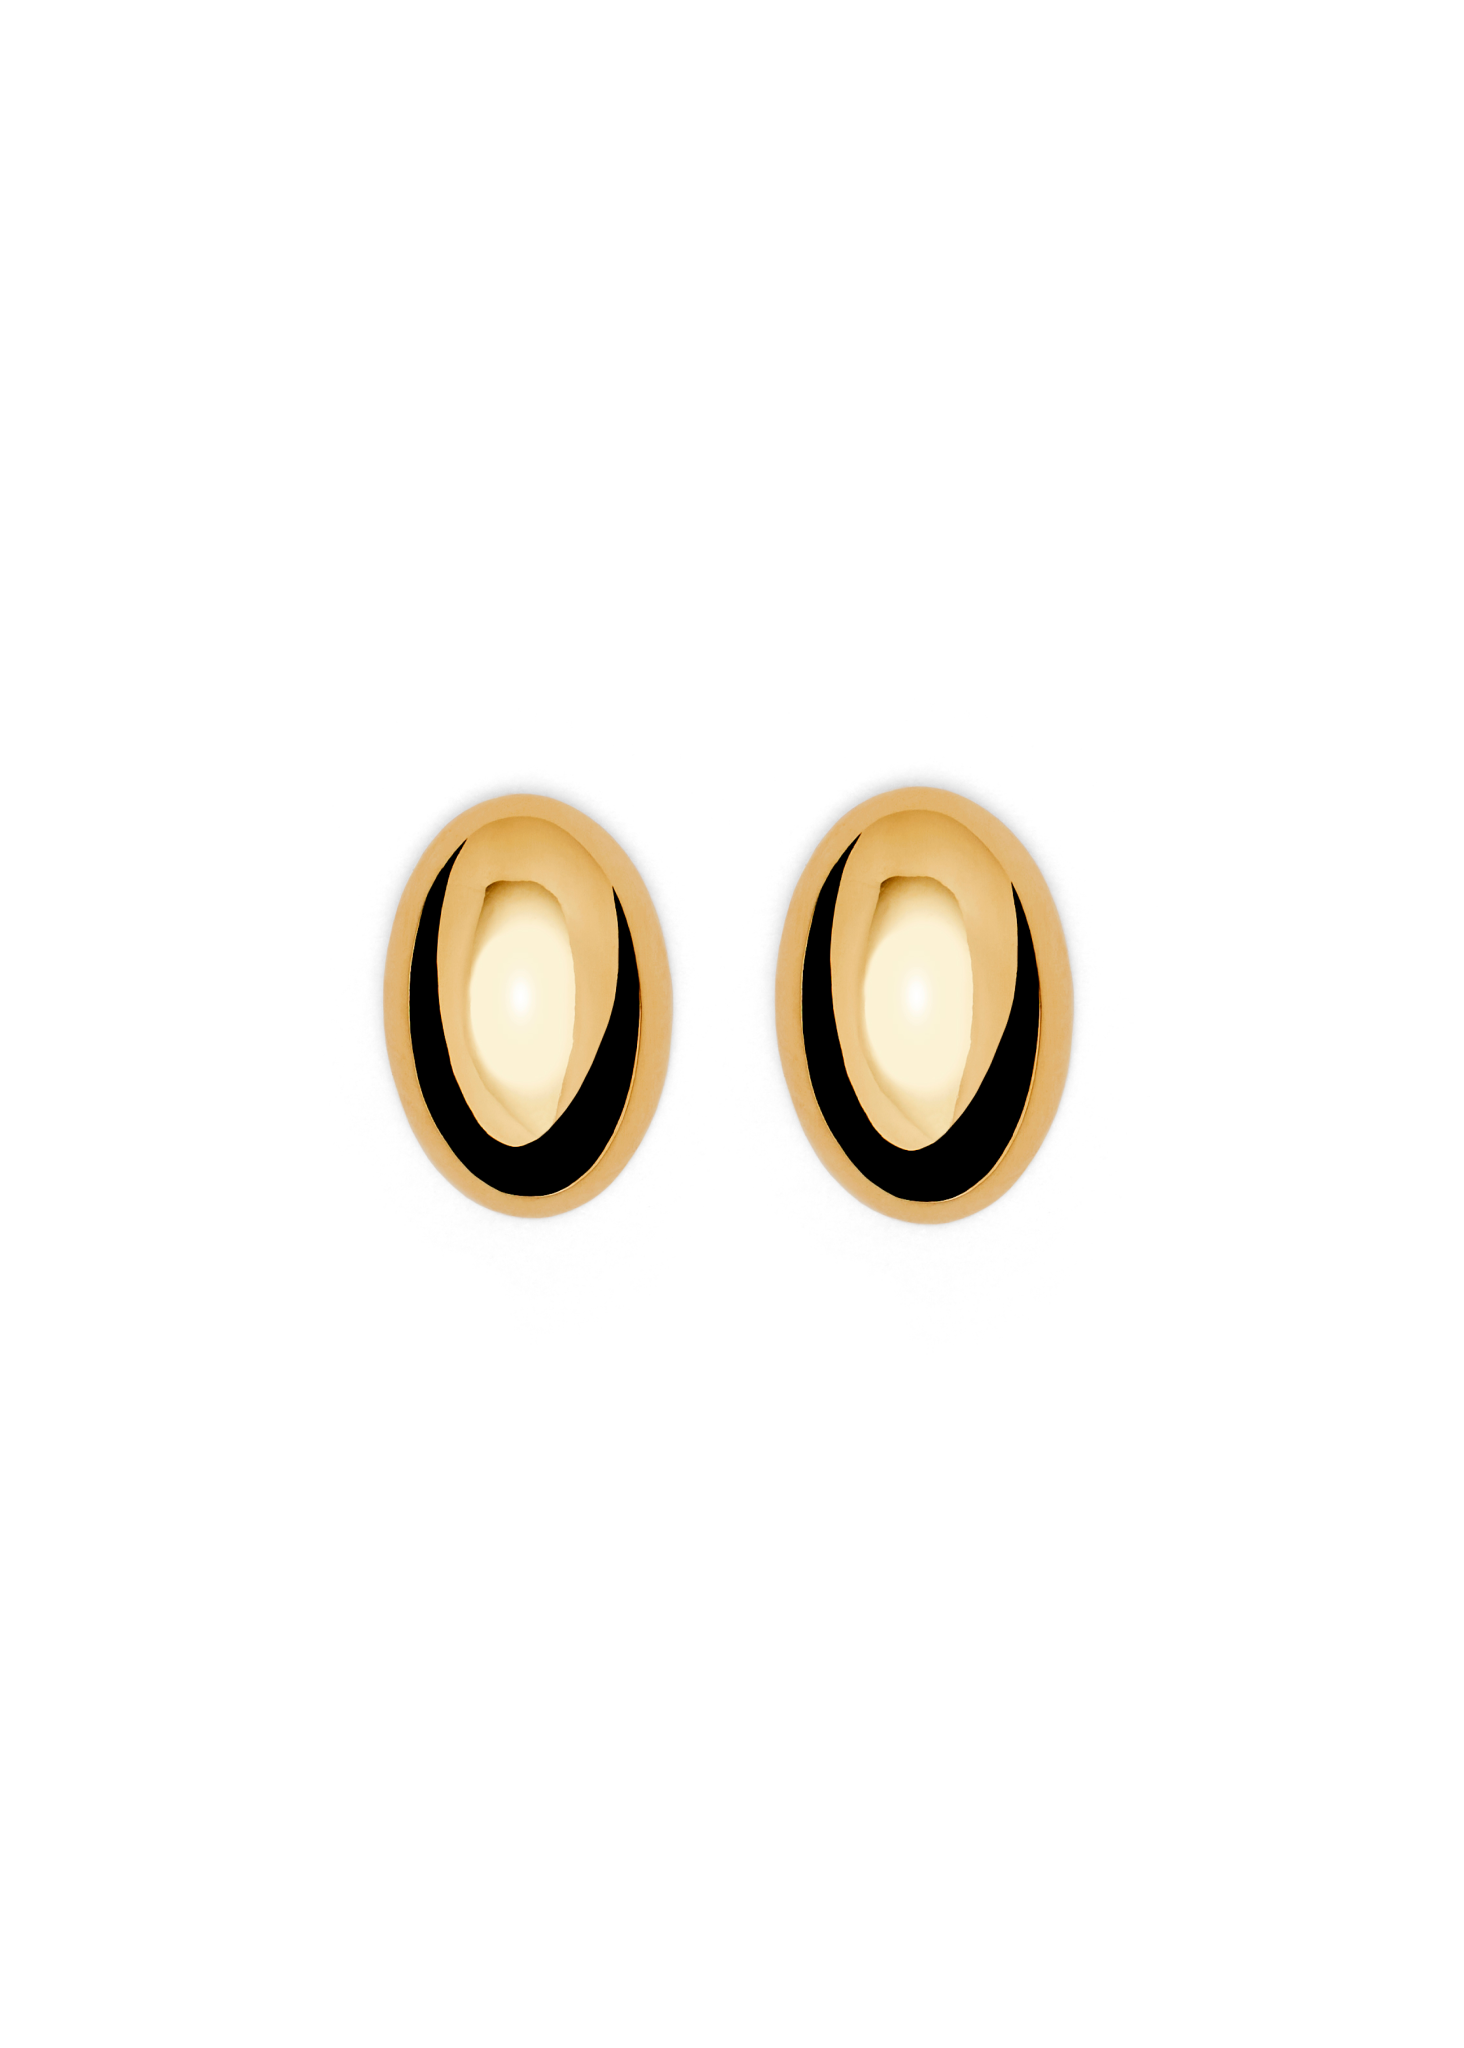 The Camille Earrings in gold or silver